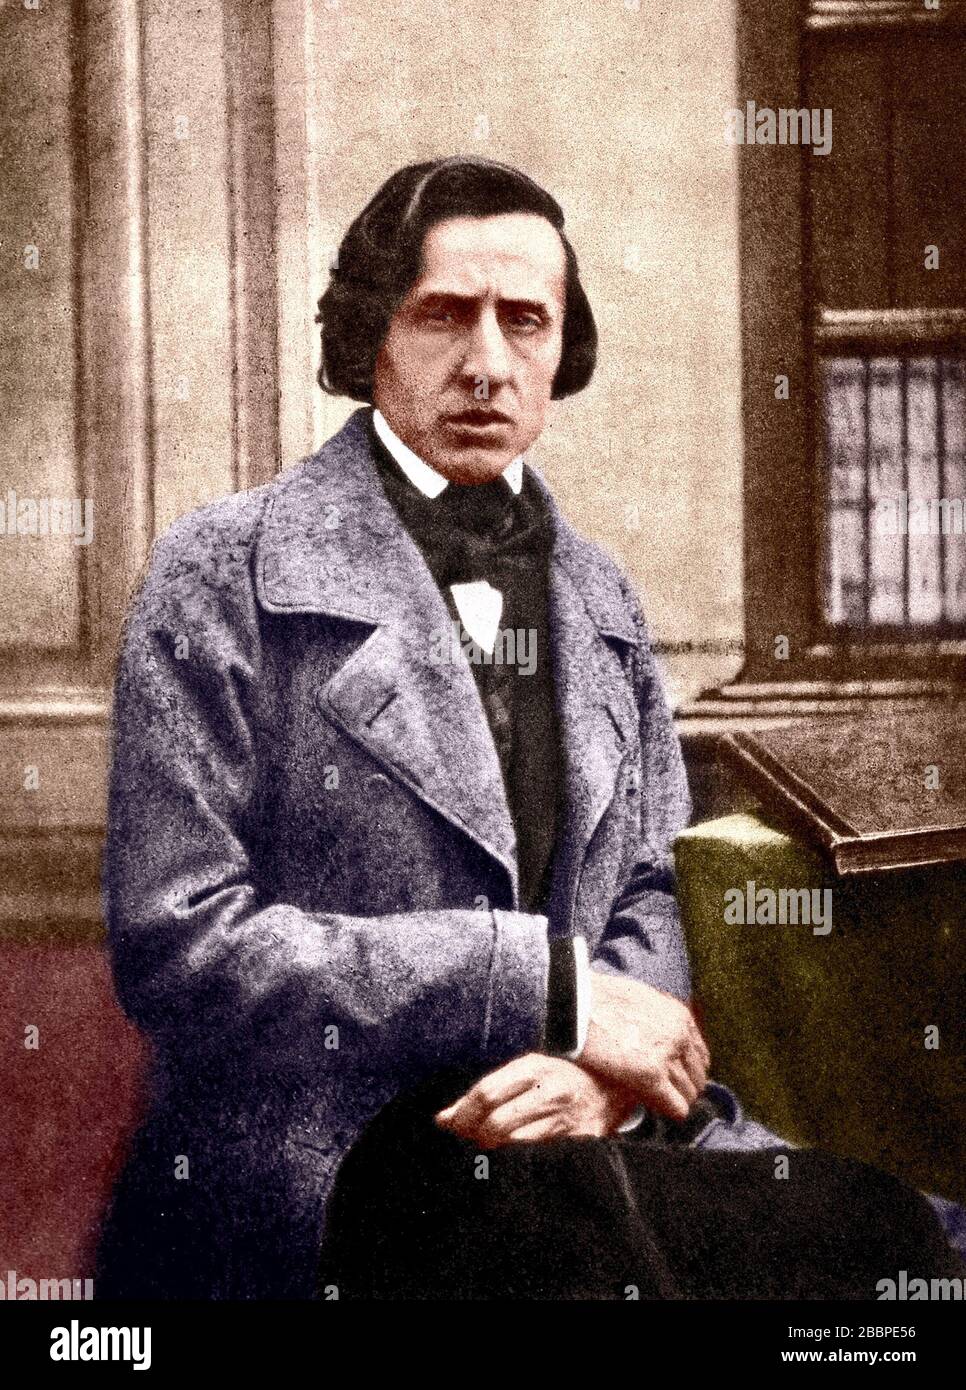 FRÉDÉRIC CHOPIN (1810-1849) Polish Romantic composer about 1849. Stock Photo